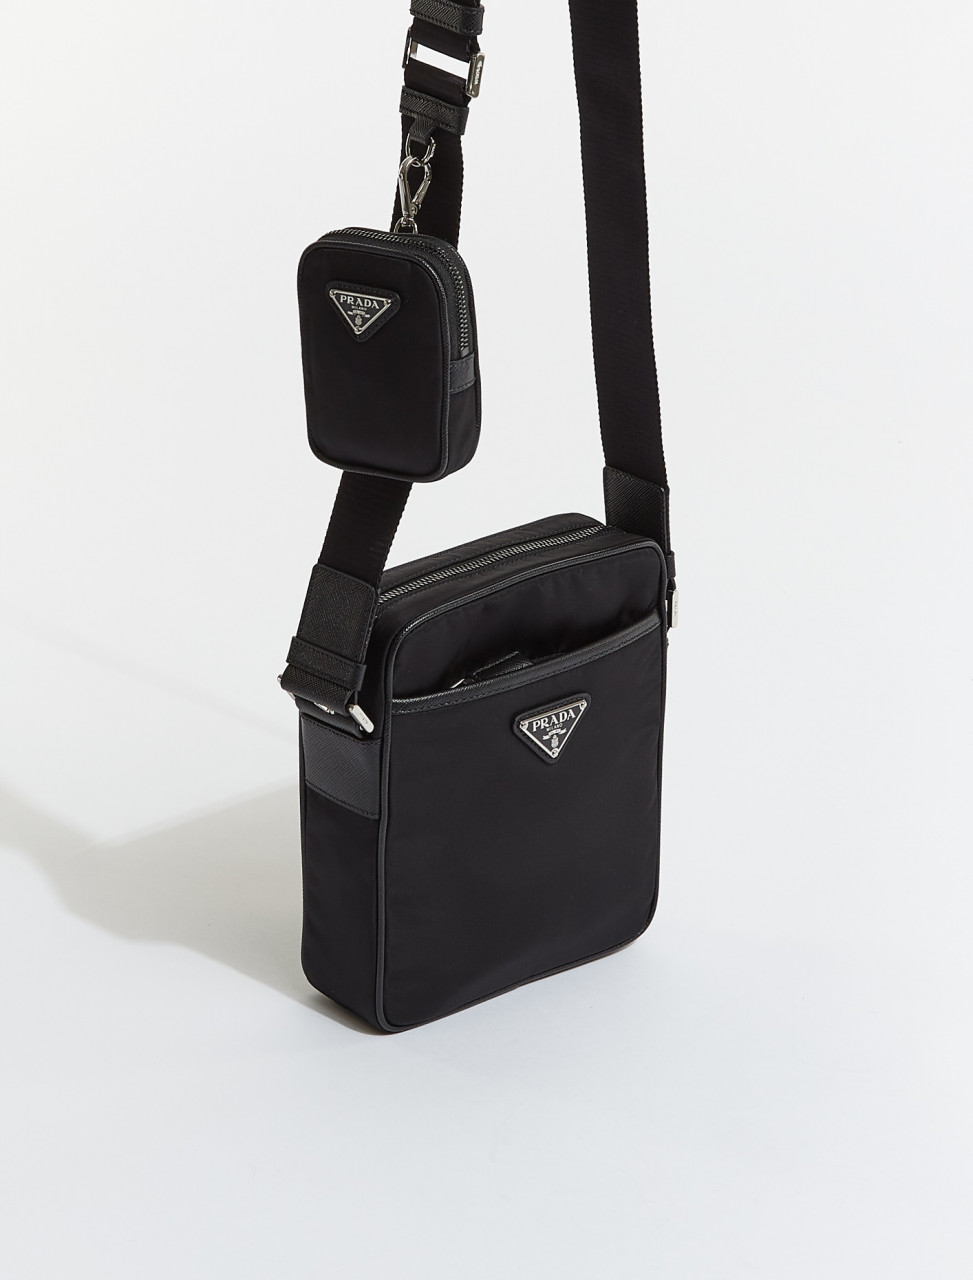 Prada Re-Nylon and Saffiano Leather Shoulder Bag in Black | Voo Store ...